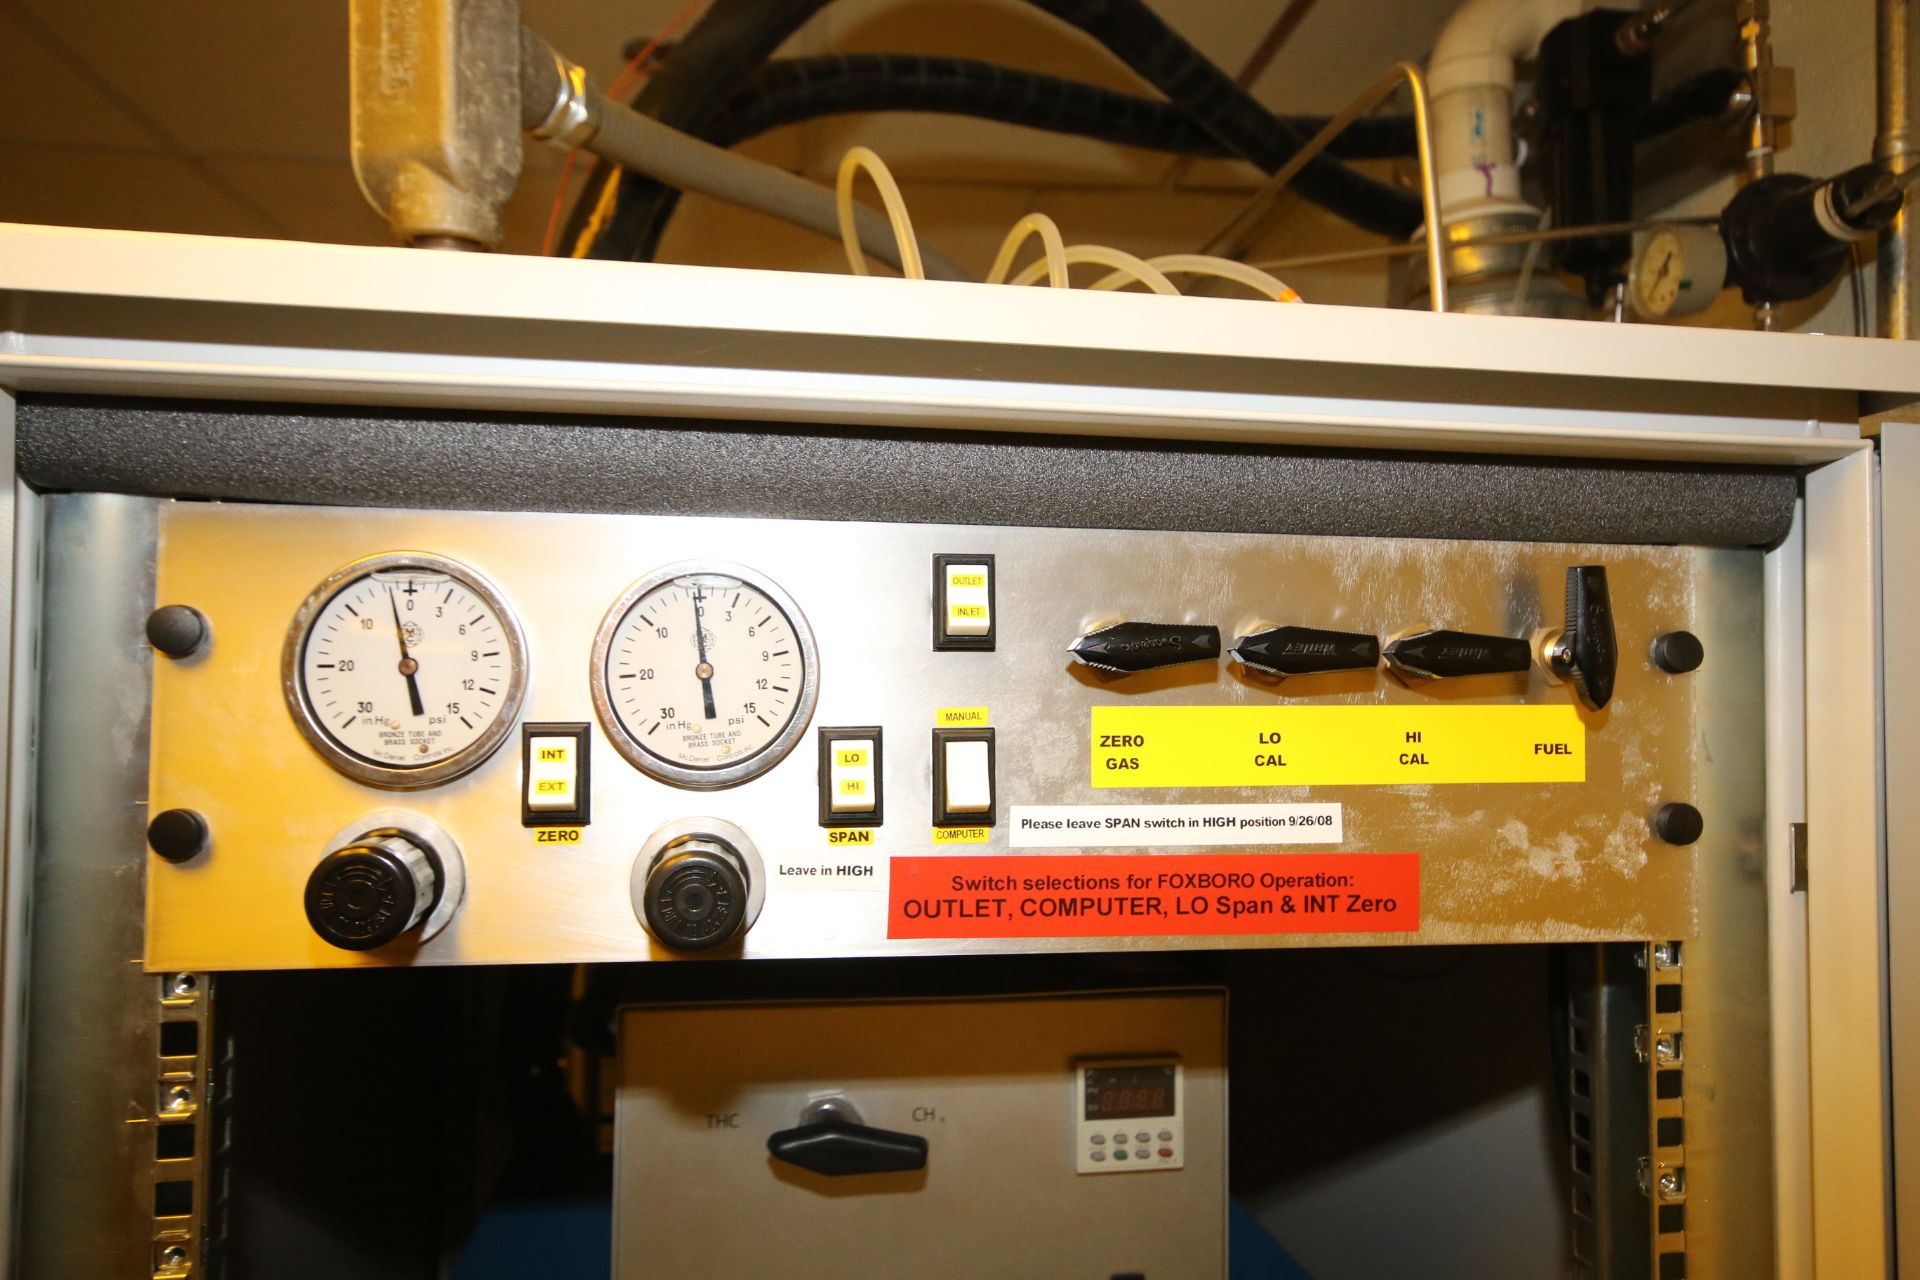 Dryer Oxidizer Emission Safety Analyzer Control Cabinet with Signal Instruments 320 Cutter and (2) - Image 3 of 6